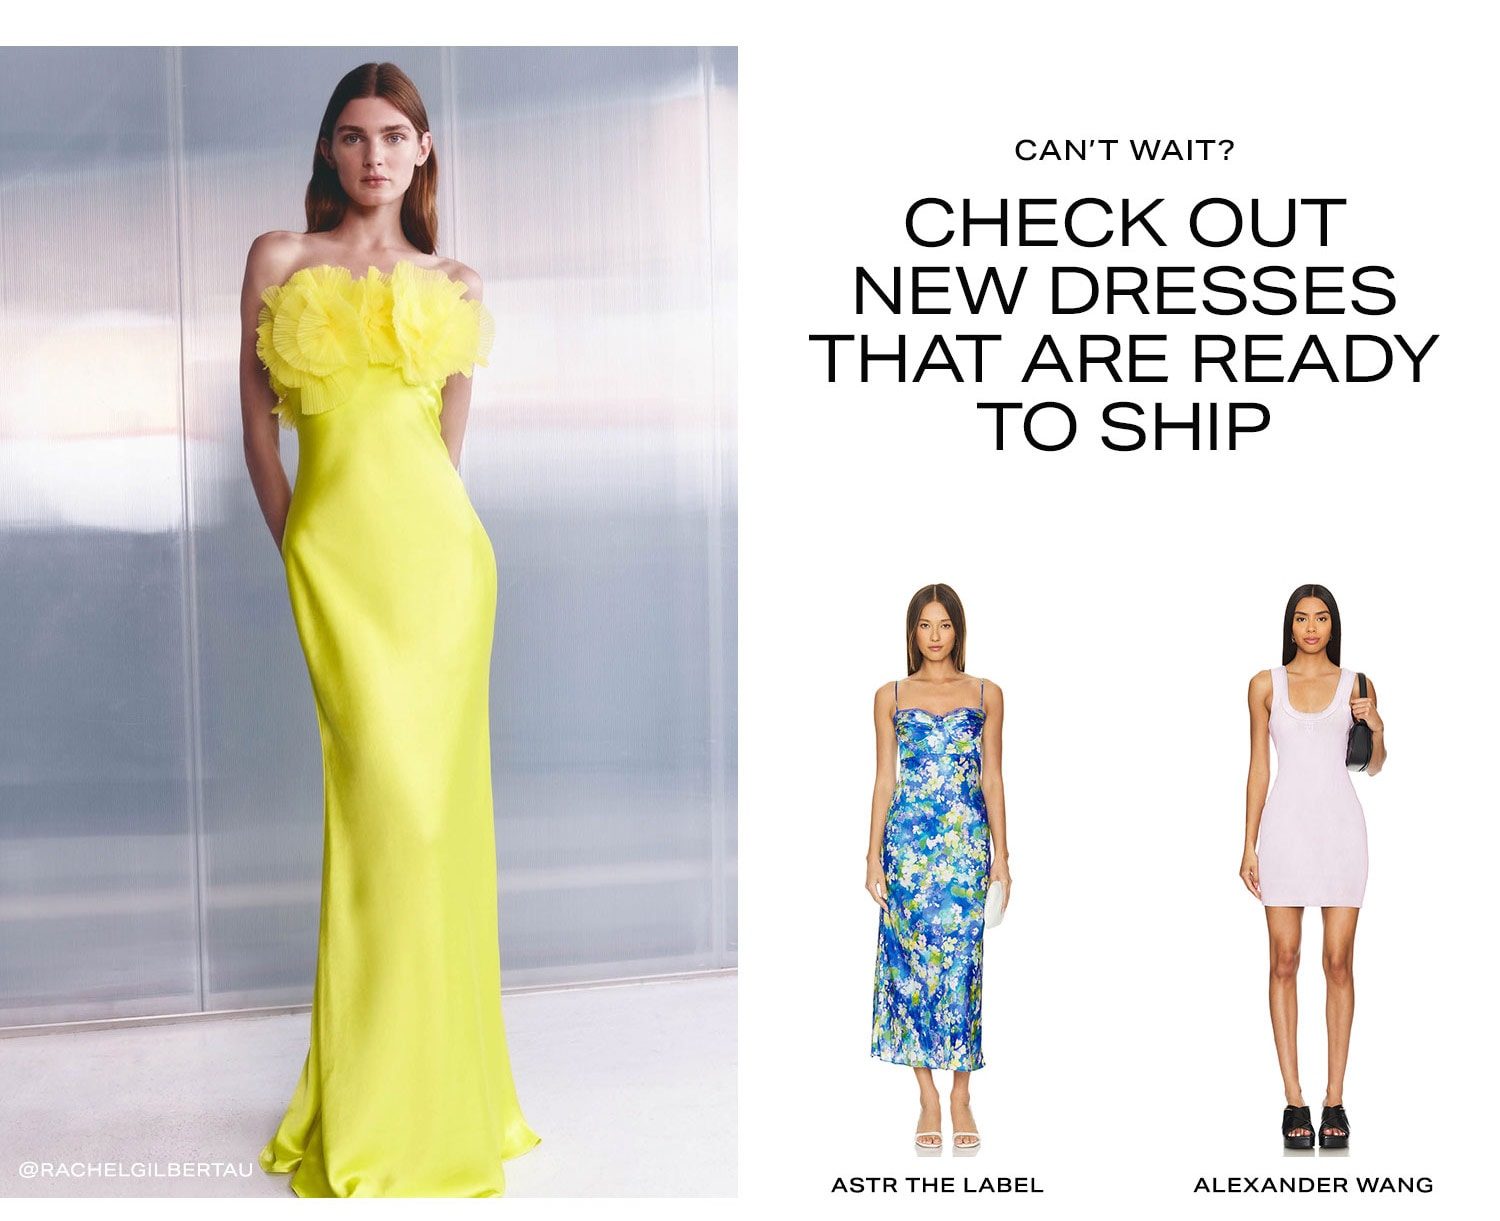 Can’t Wait? Check Out New Dresses That Are Ready to Ship